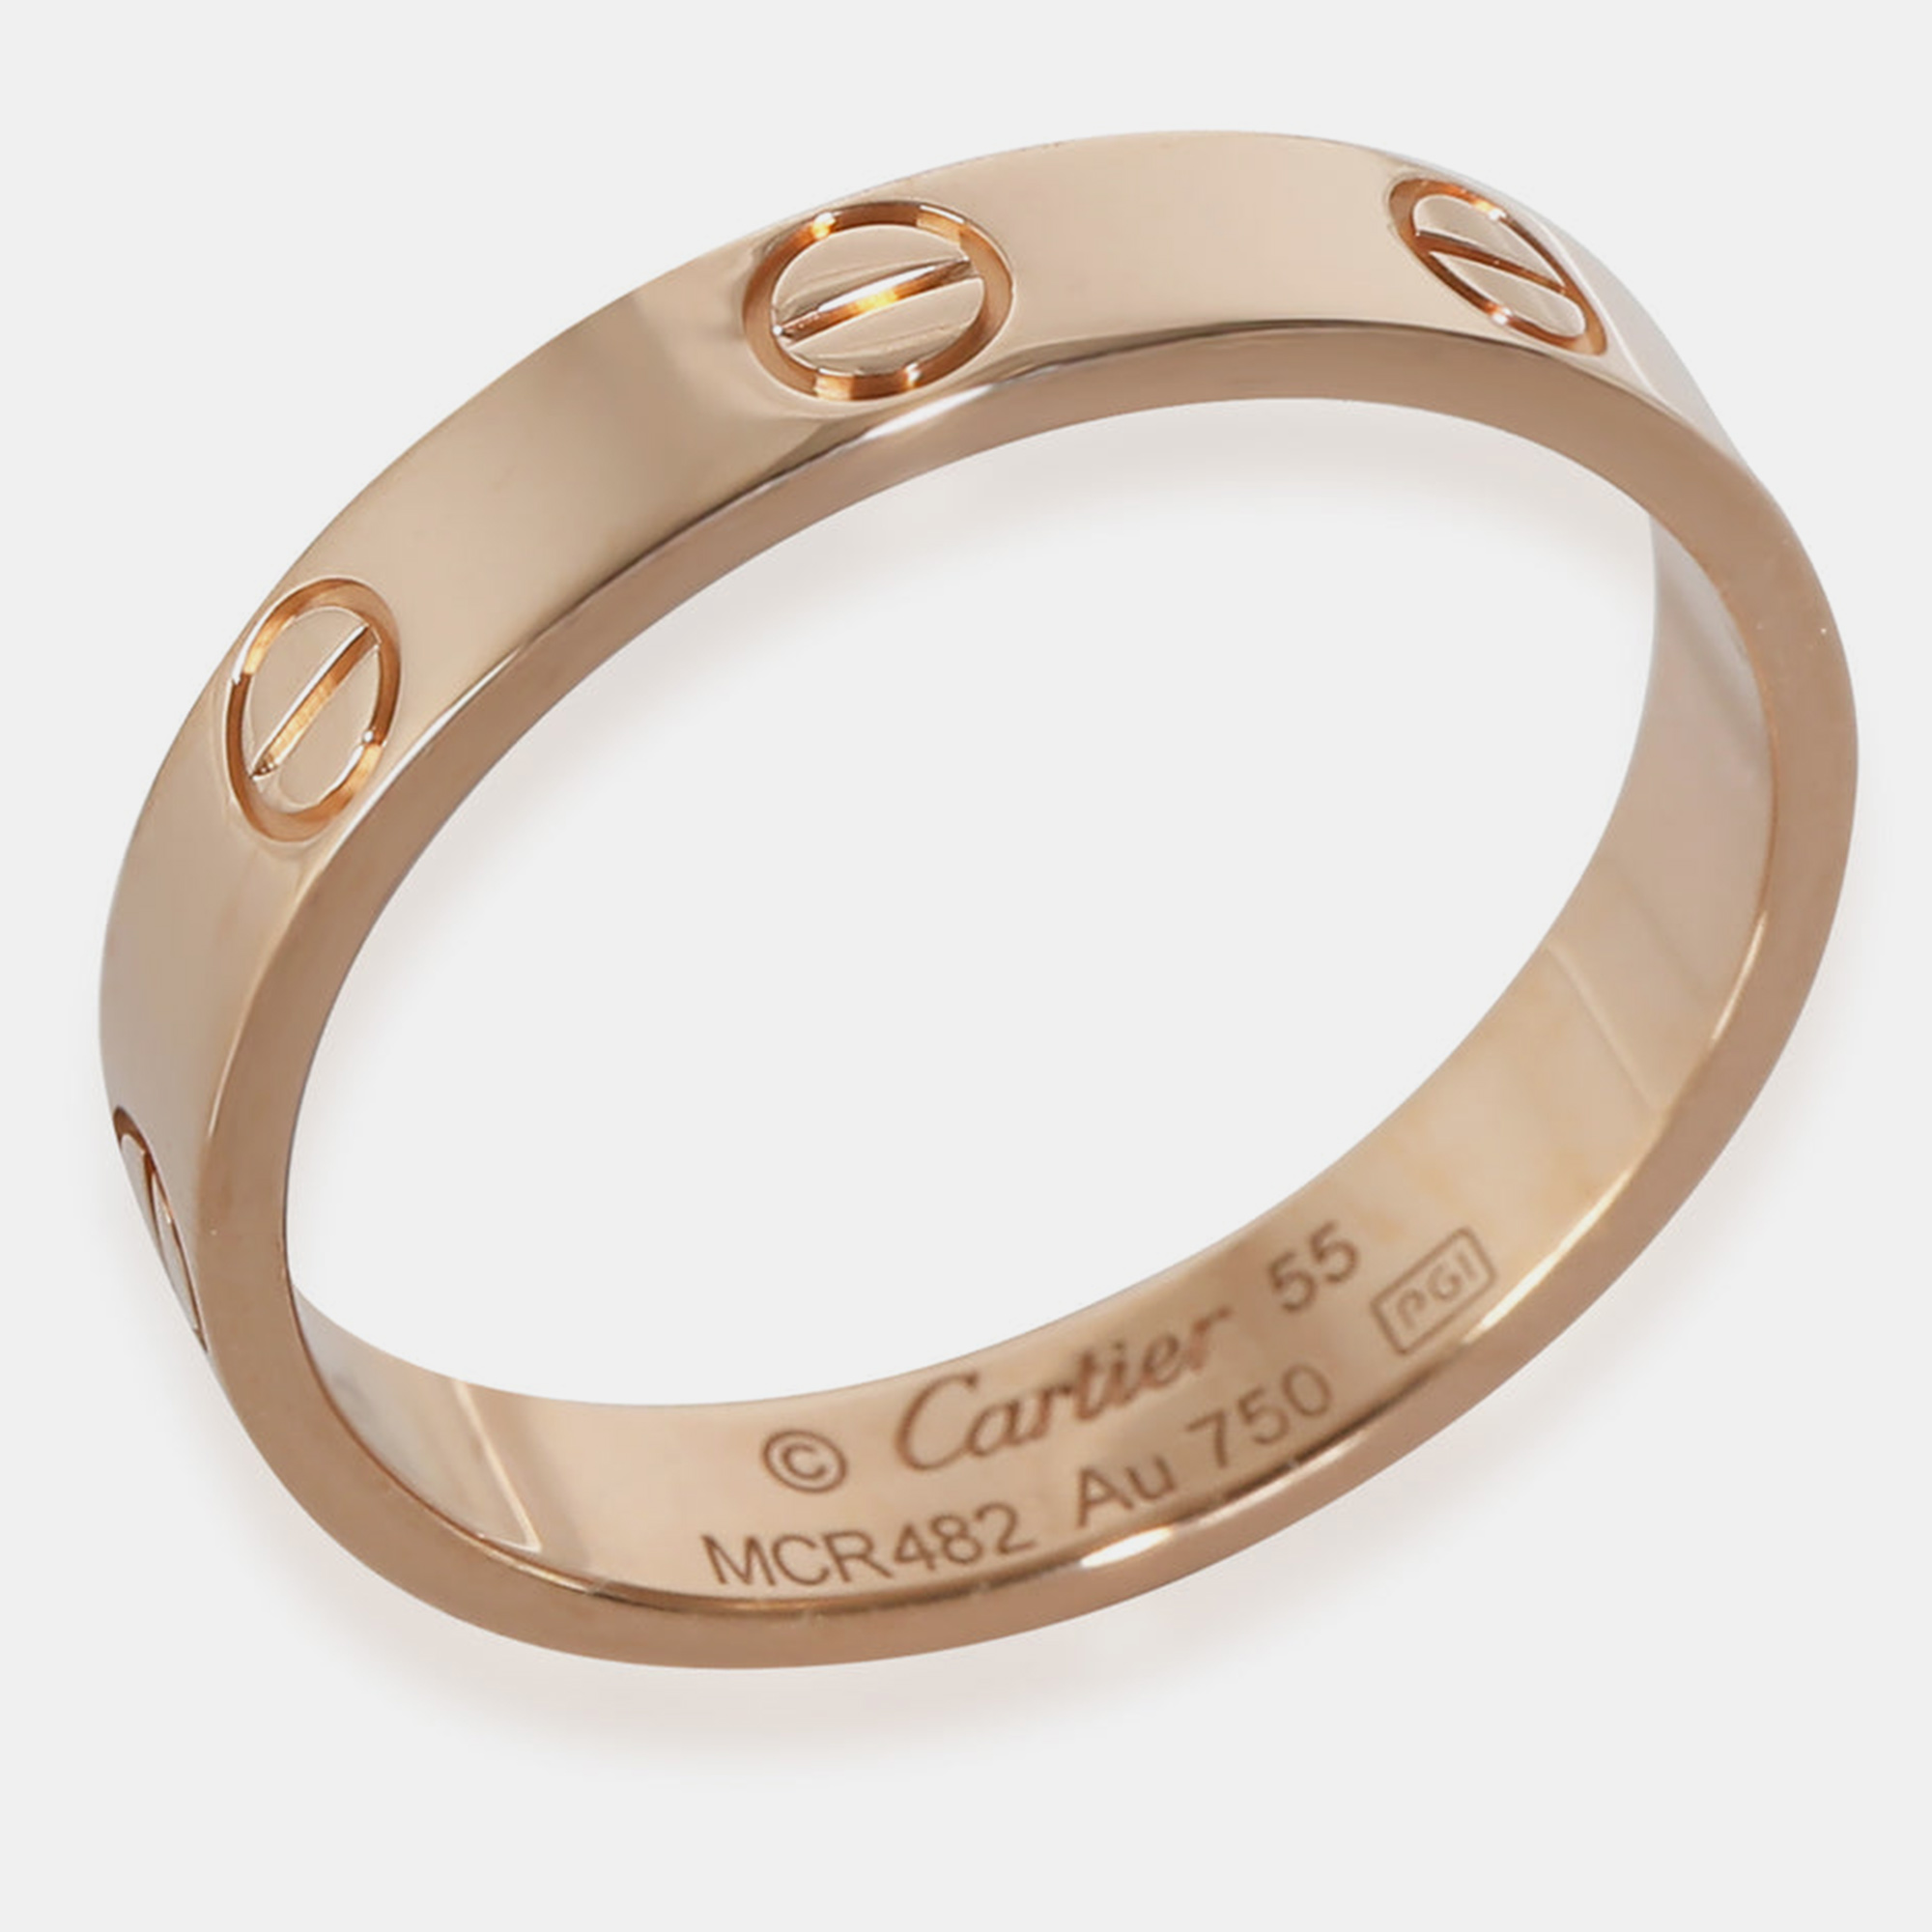 Pre-owned Cartier 18k Rose Gold Love Fashion Ring Eu 55